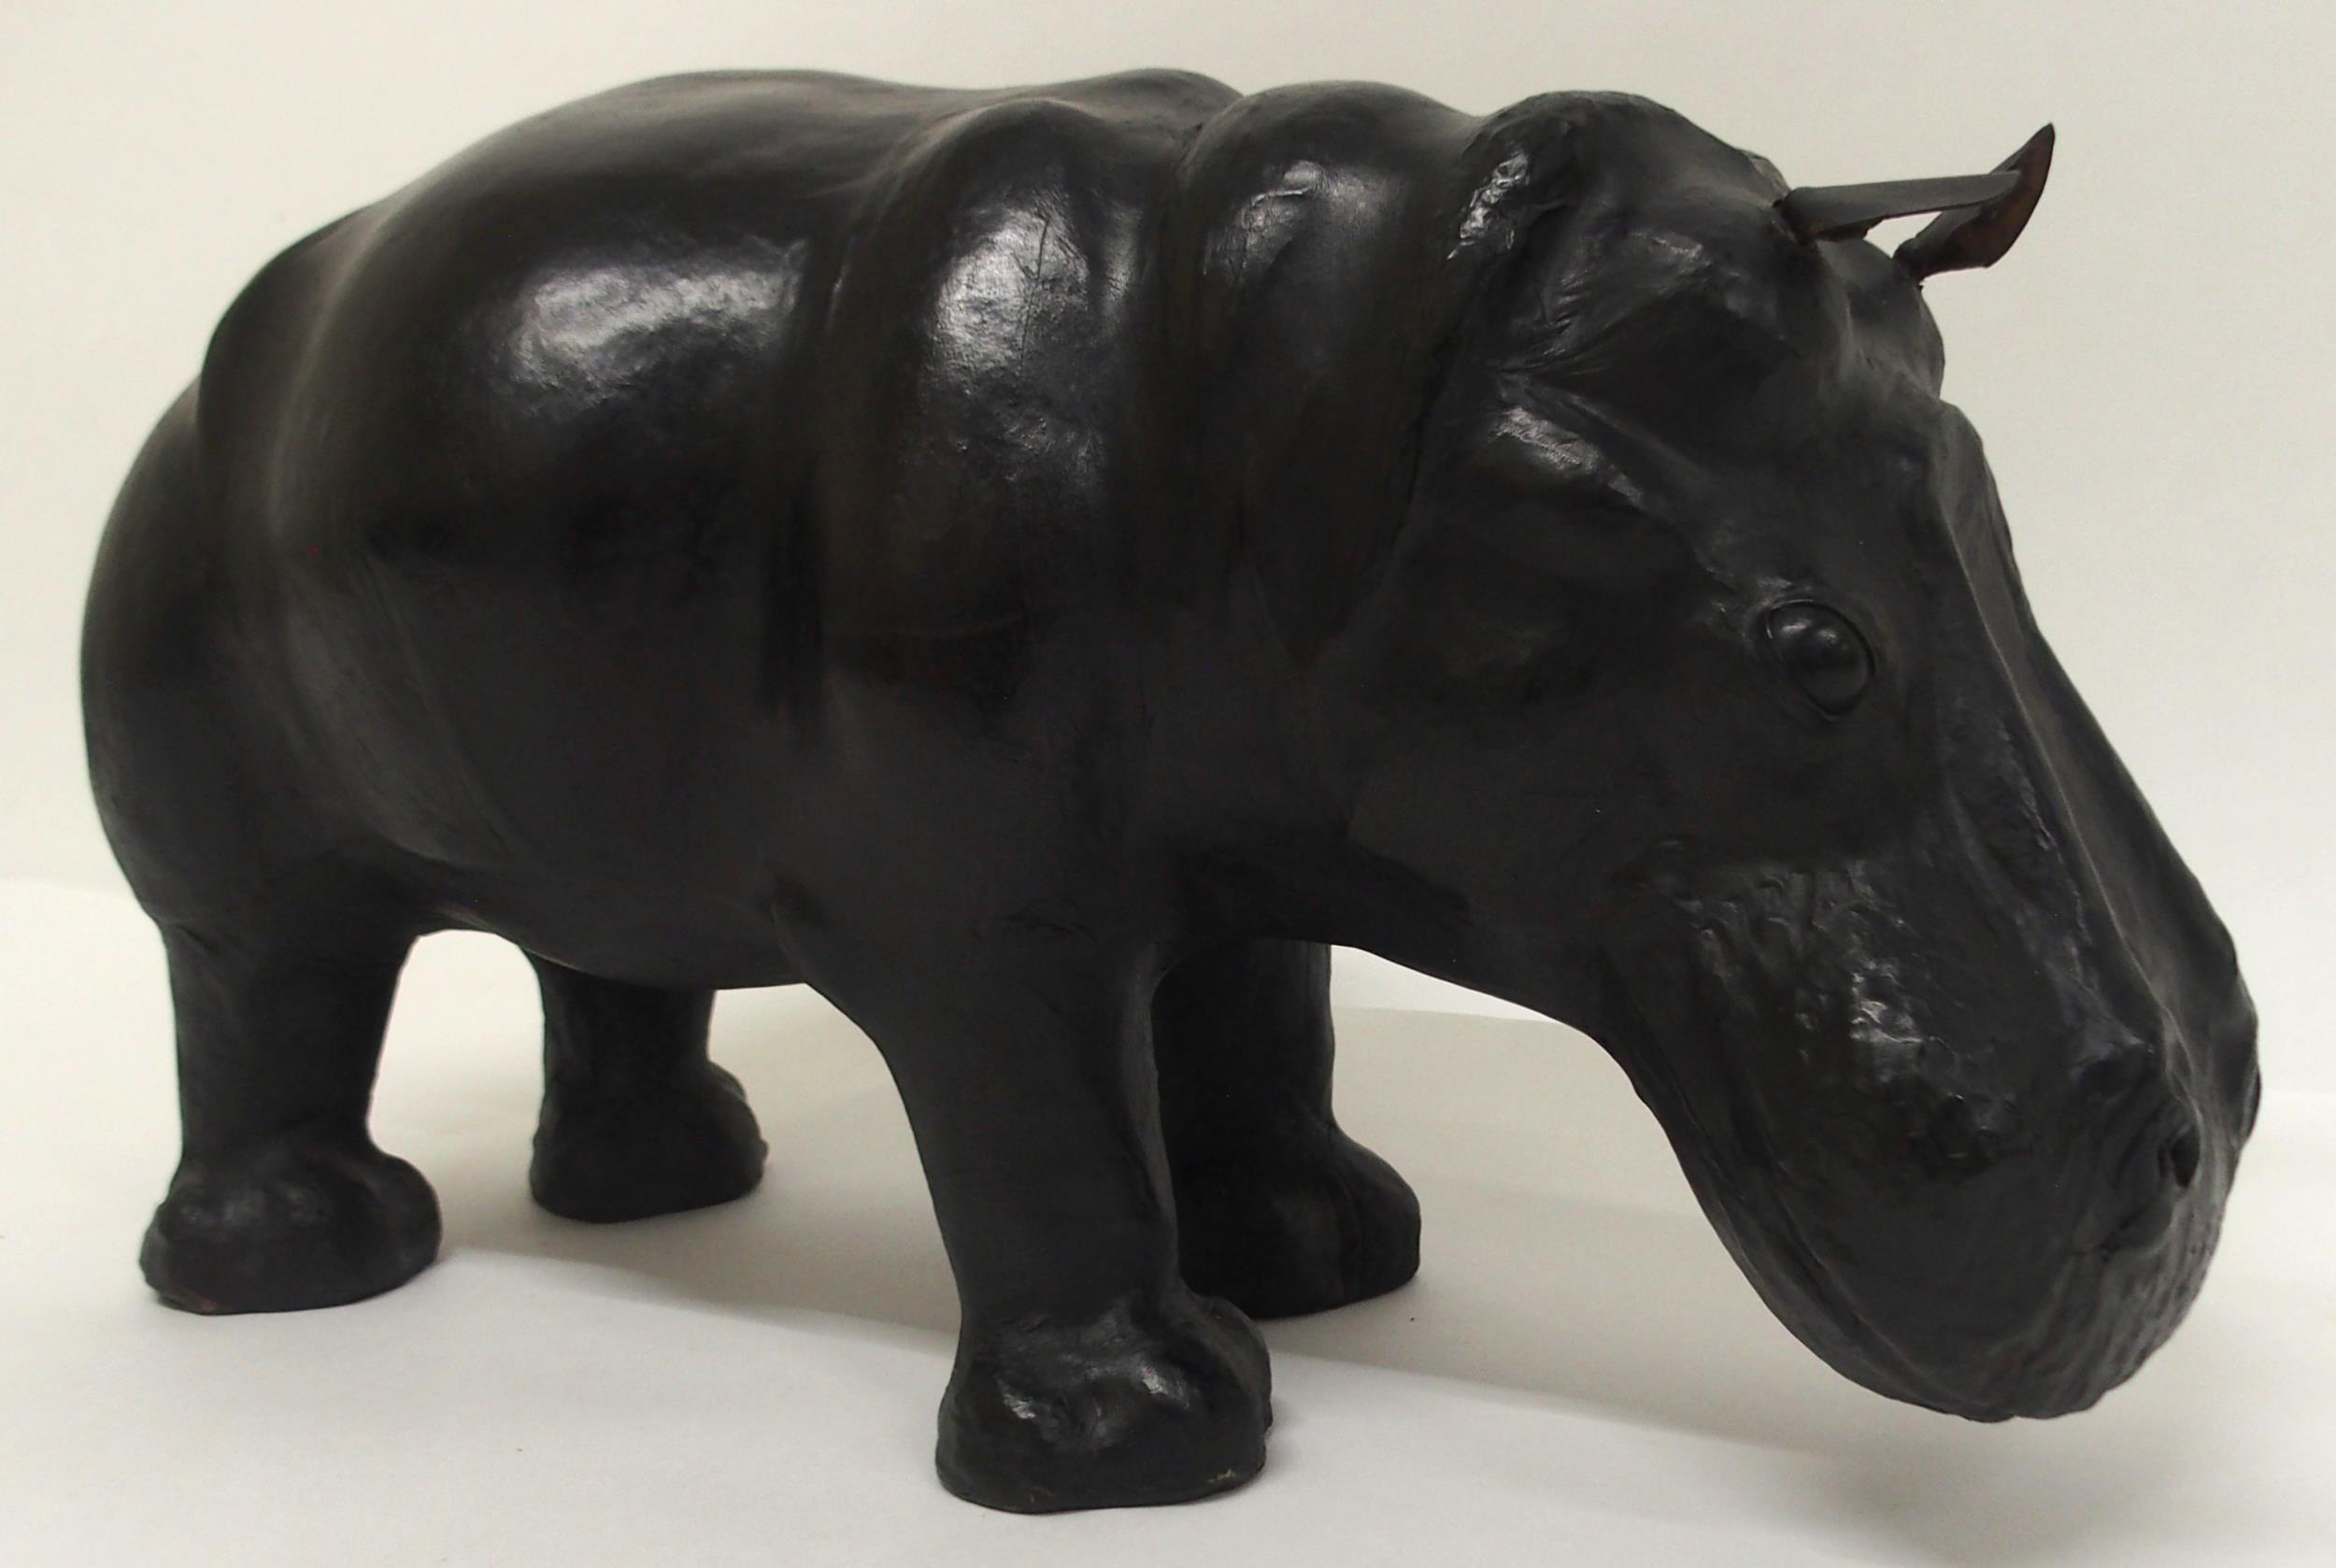 AN EARLY 20TH CENTURY LIBERTY OF LONDON STYLE LEATHER HIPPOPOTAMUS FOOTSTOOL with glass eyes, 32cm - Image 2 of 5